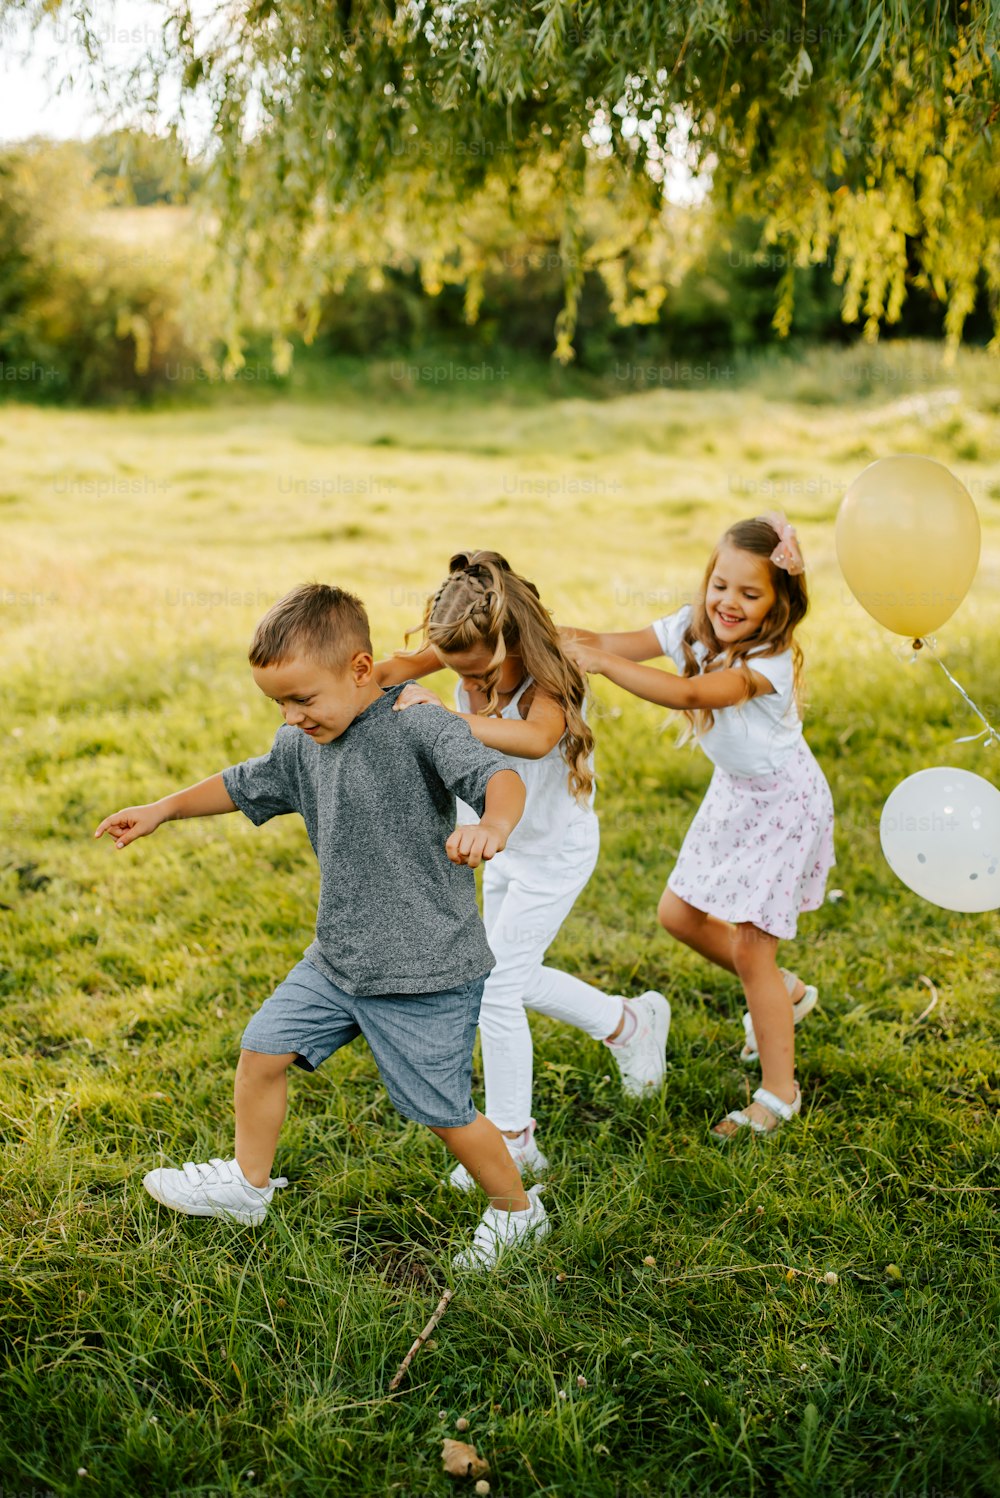 a group of young children playing with balloons